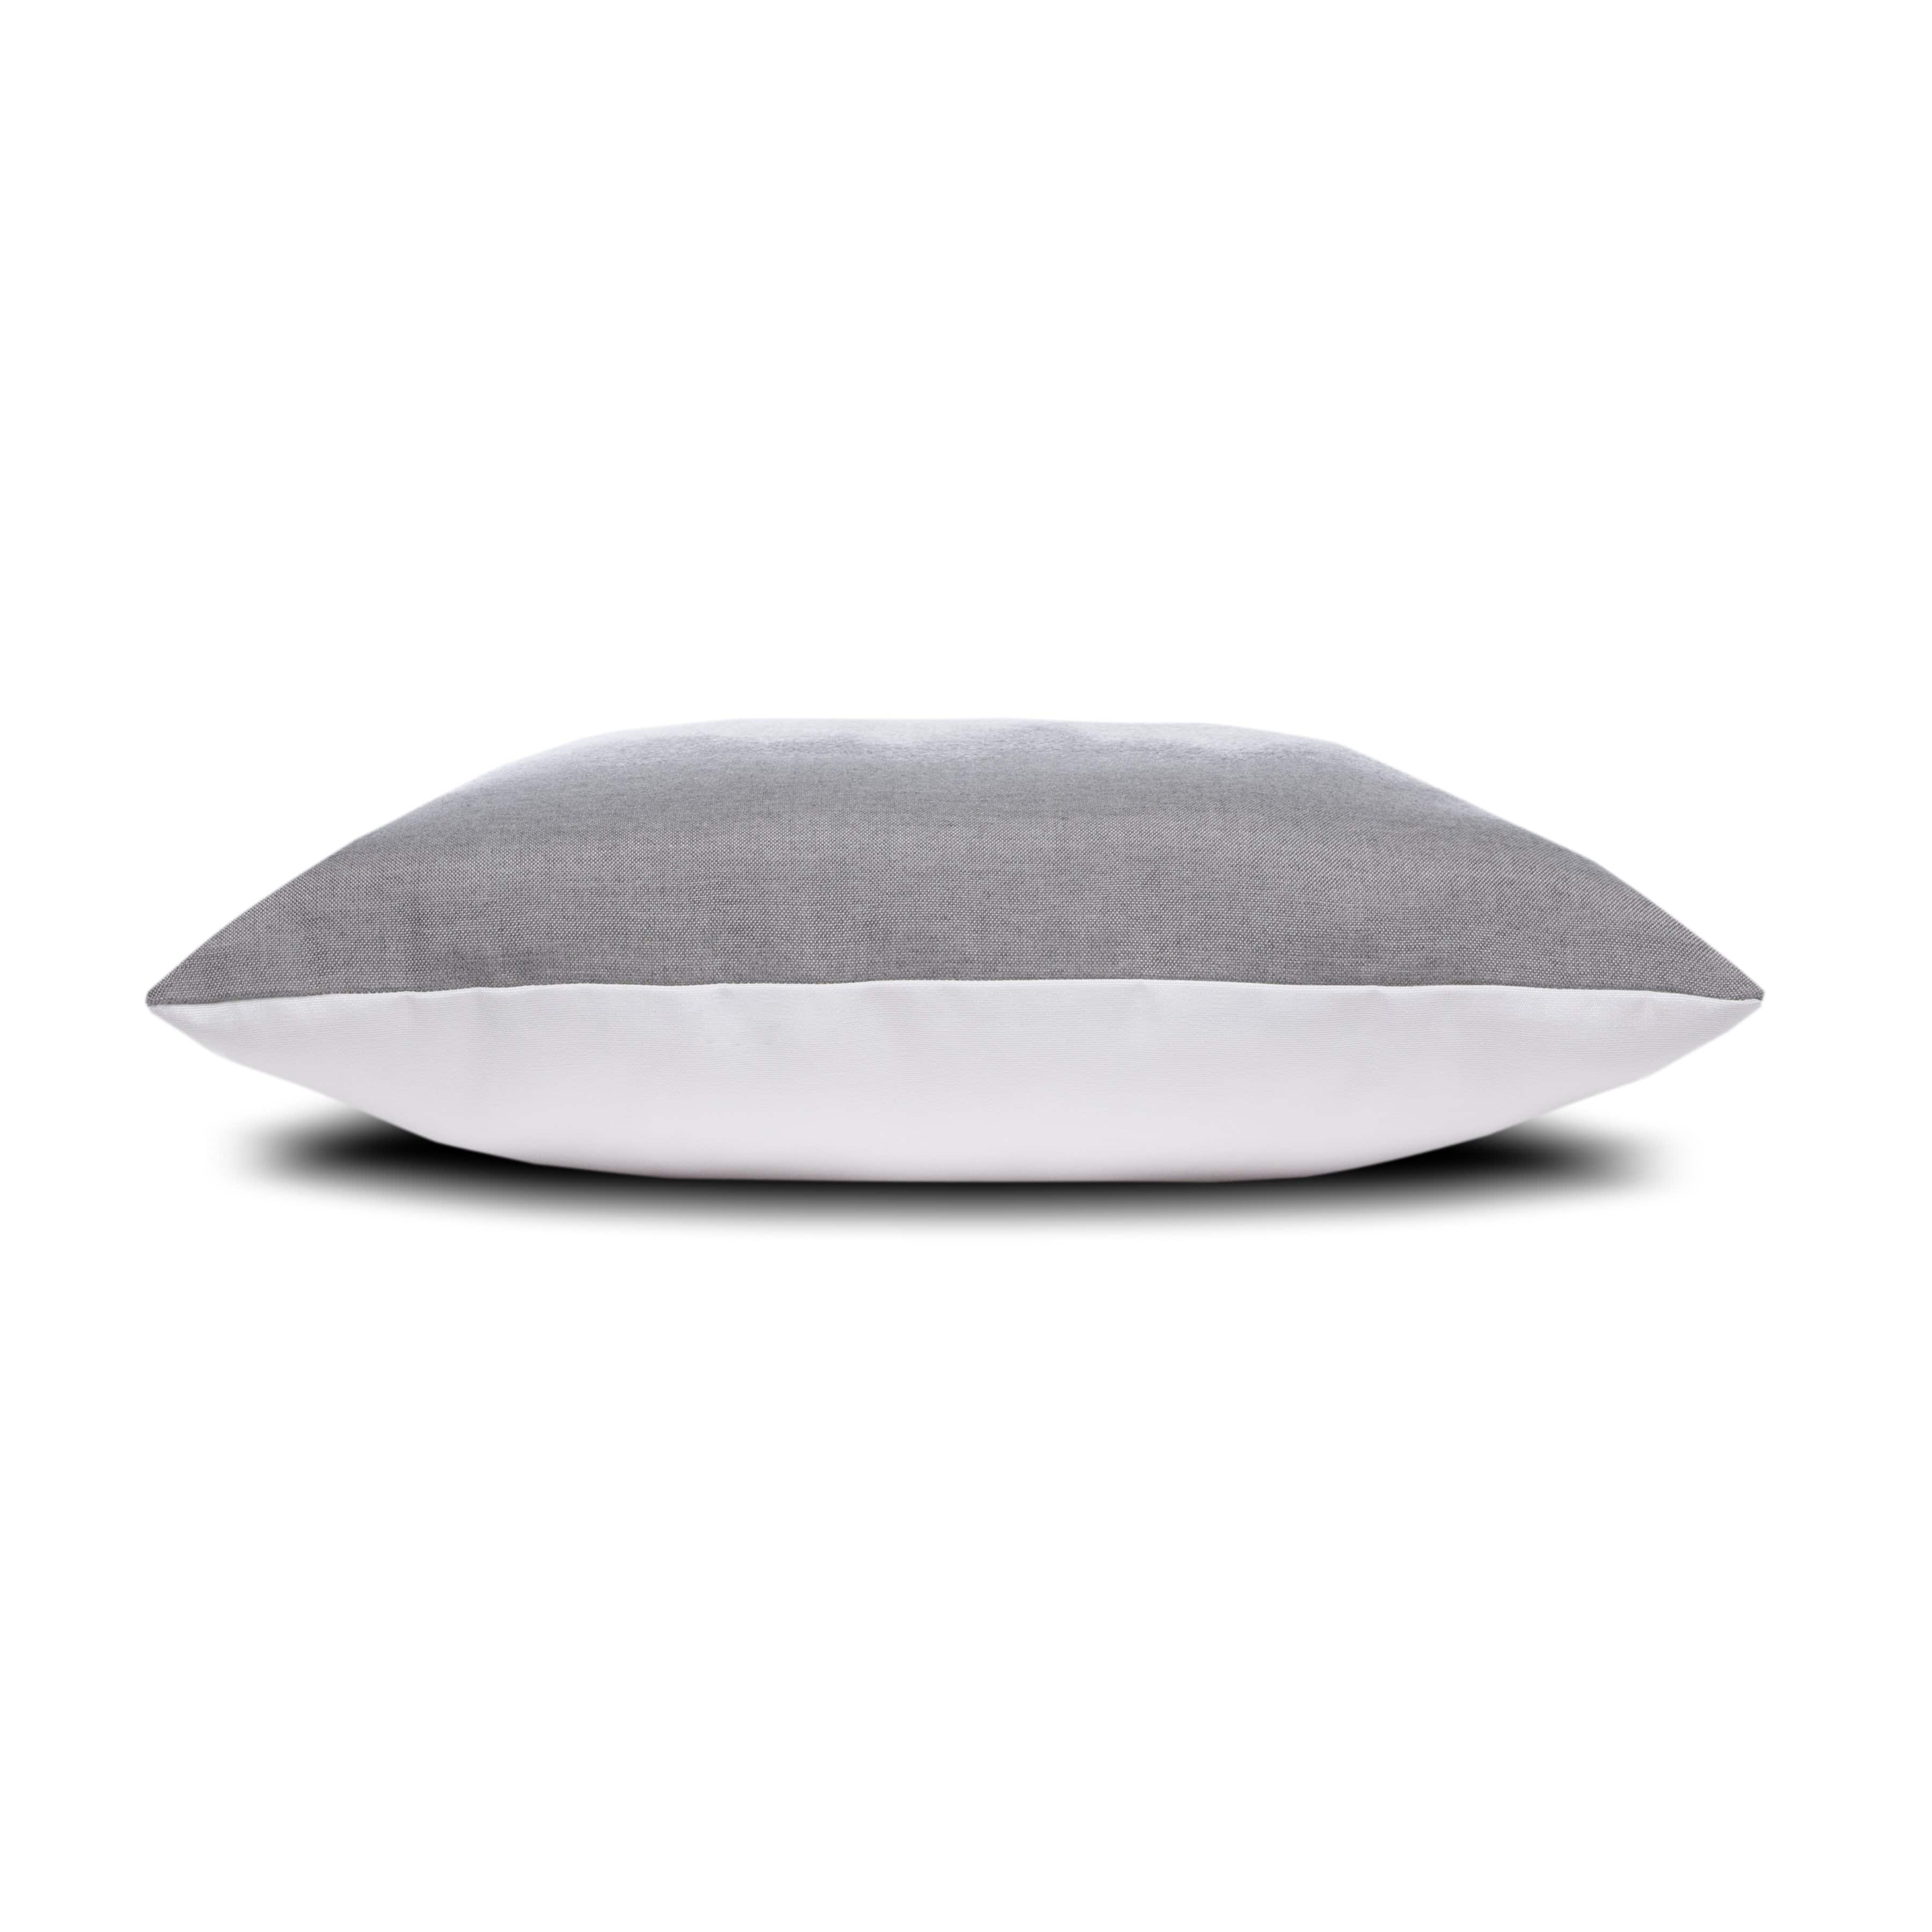 Charcoal Pillow